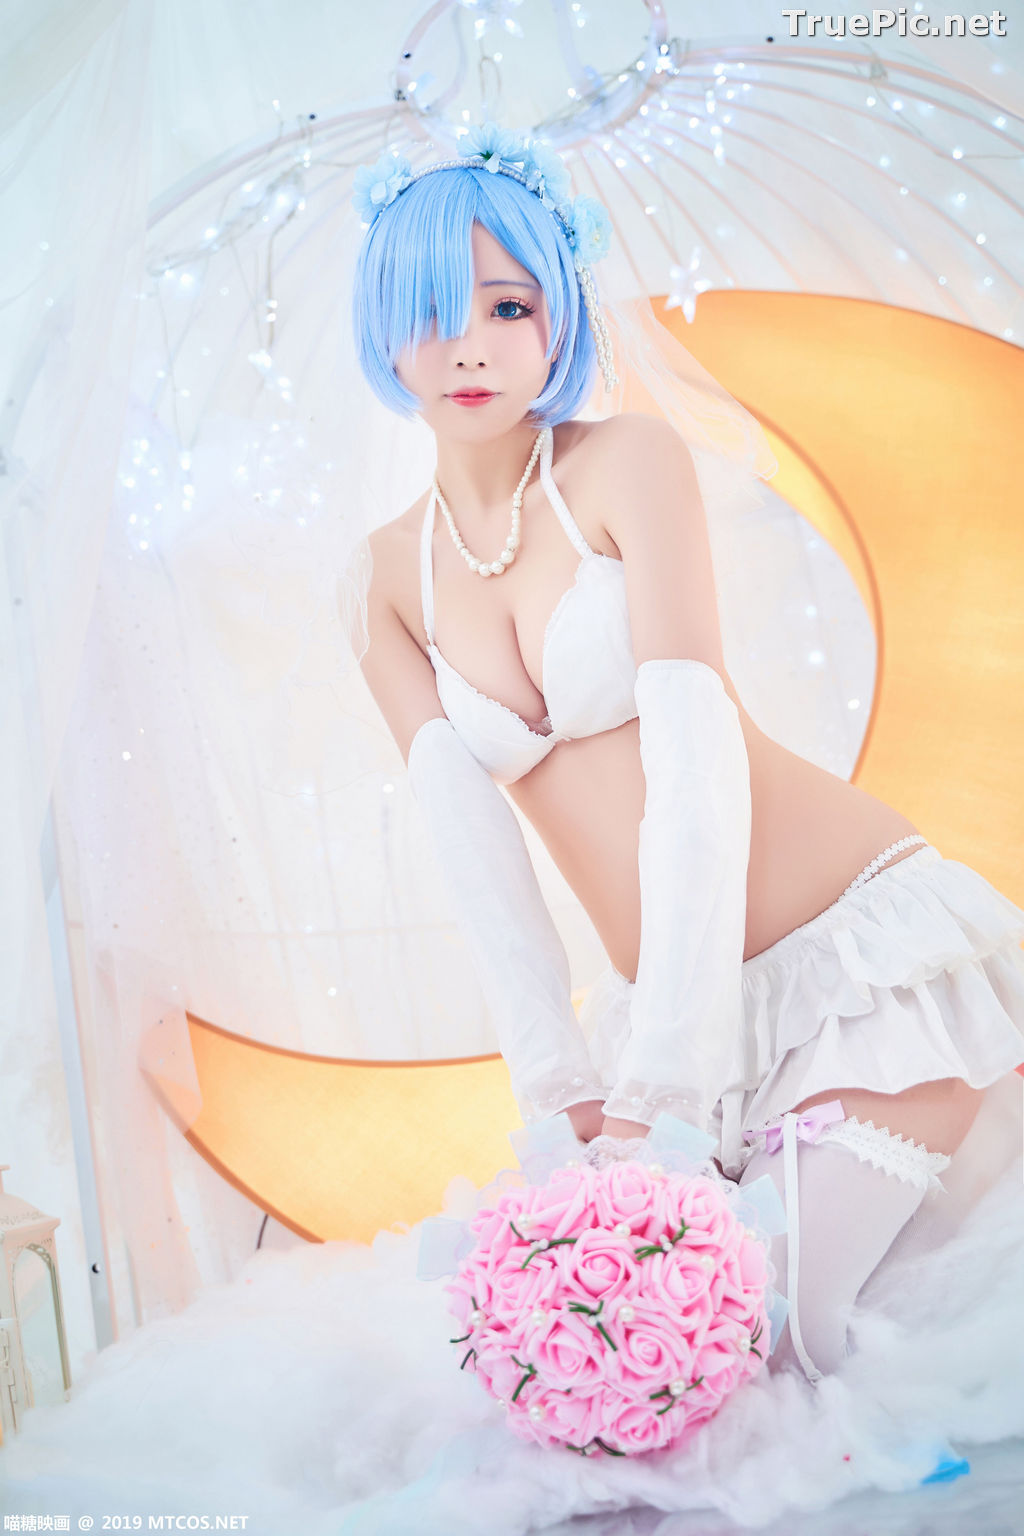 Image [MTCos] 喵糖映画 Vol.043 – Chinese Cute Model – Sexy Rem Cosplay - TruePic.net - Picture-10